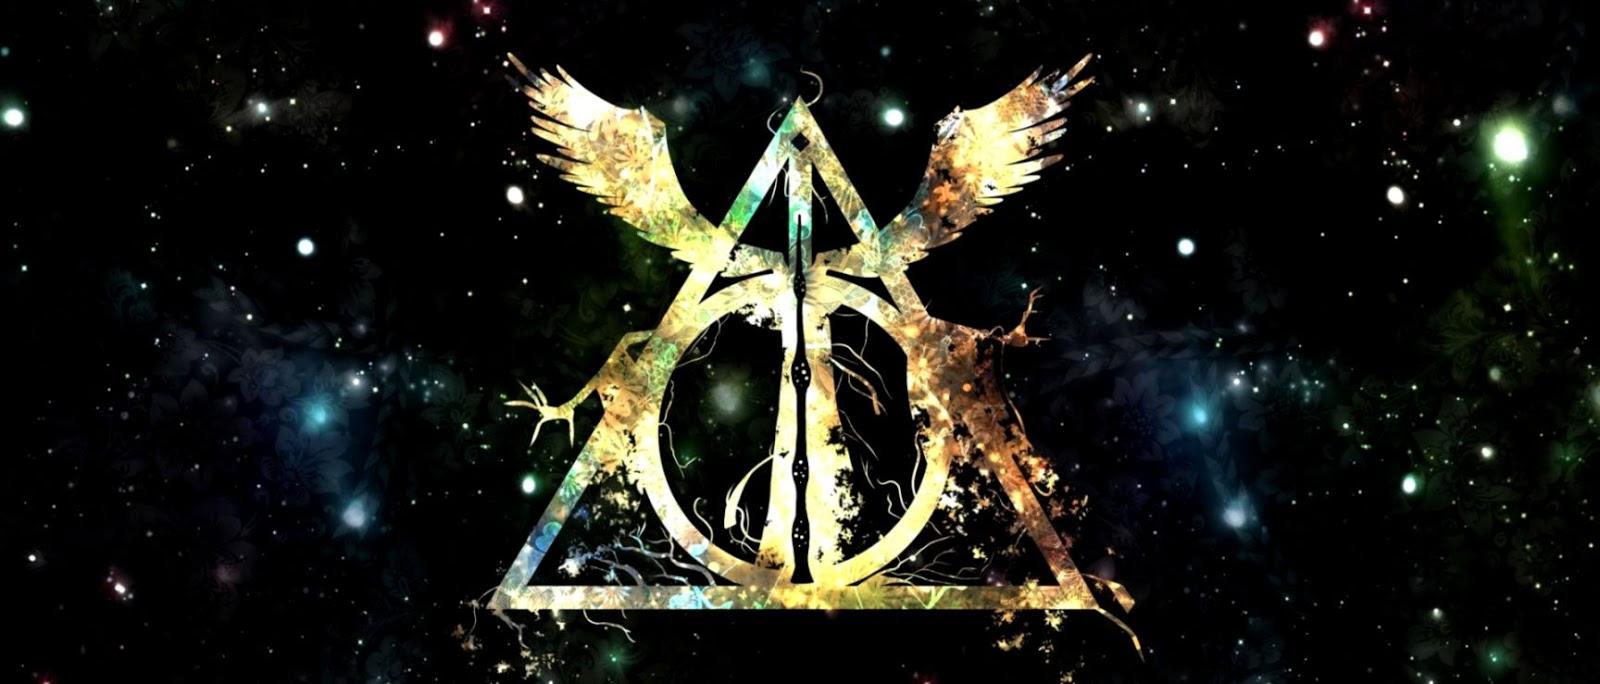 Harry Potter And The Deathly Hallows Free Download